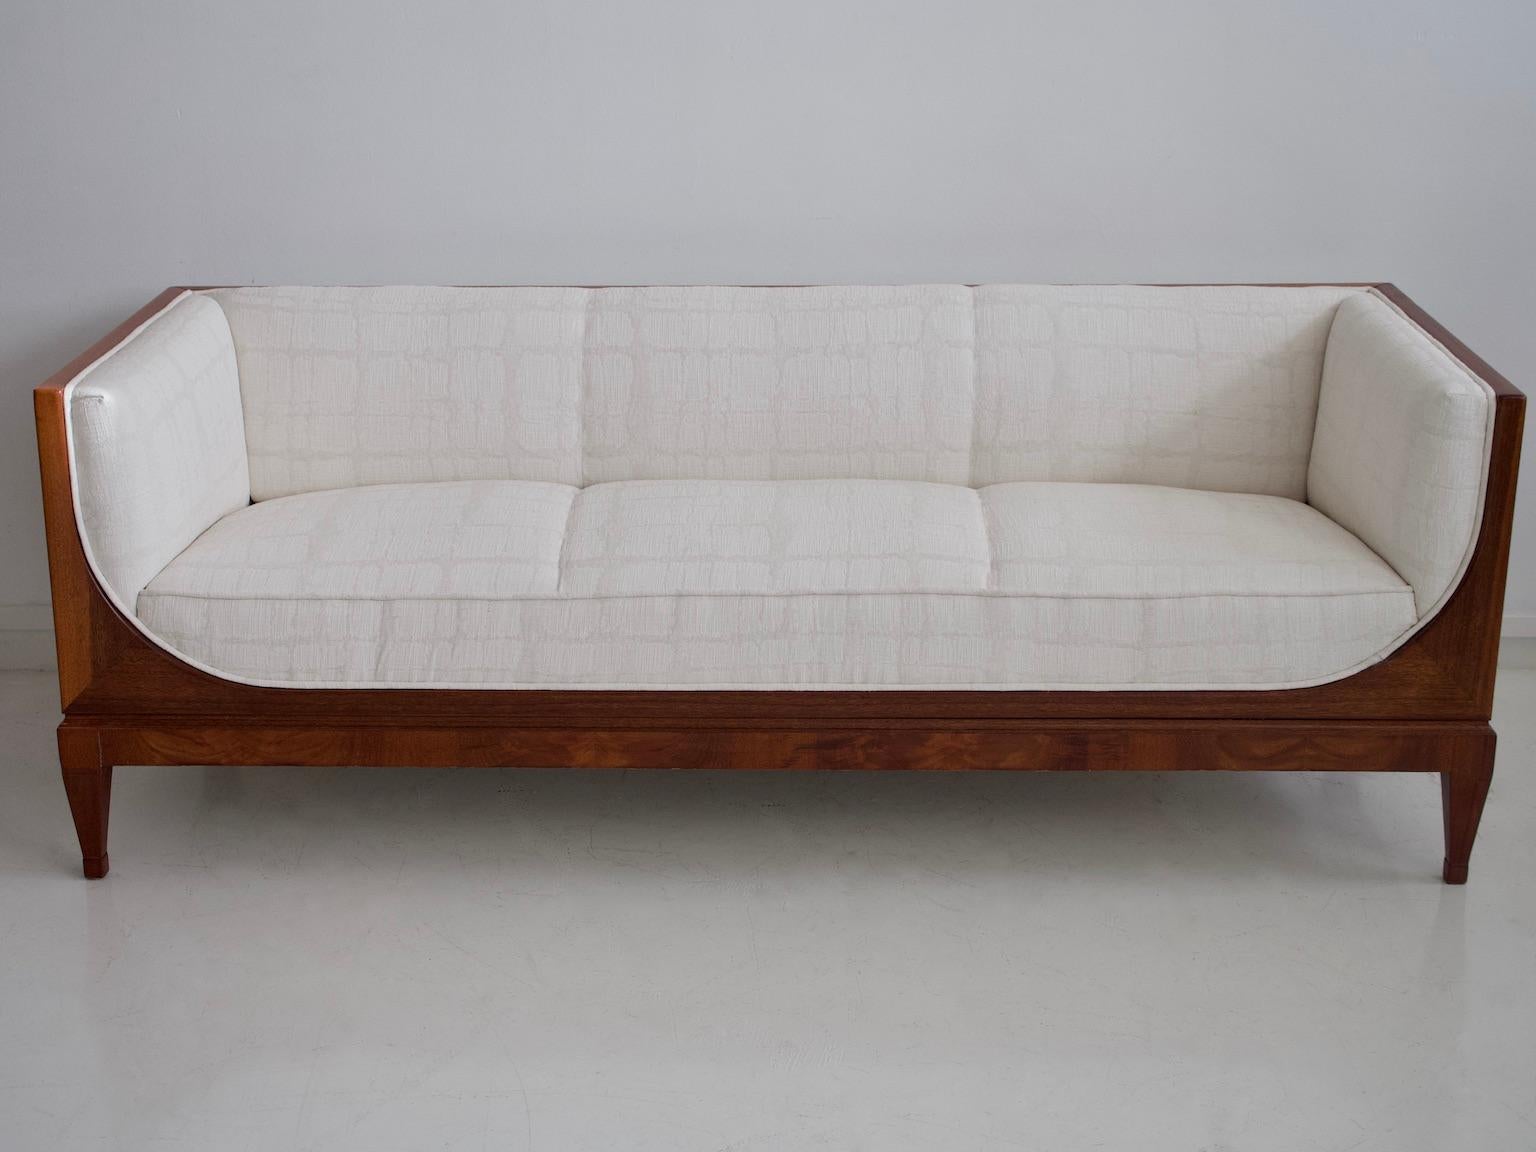 Beautiful box-shaped mahogany sofa designed by Frits Henningsen and produced in the 1940s. Front with rounded sleigh-shaped sides, tapered legs. Reupholstered in white textured fabric.